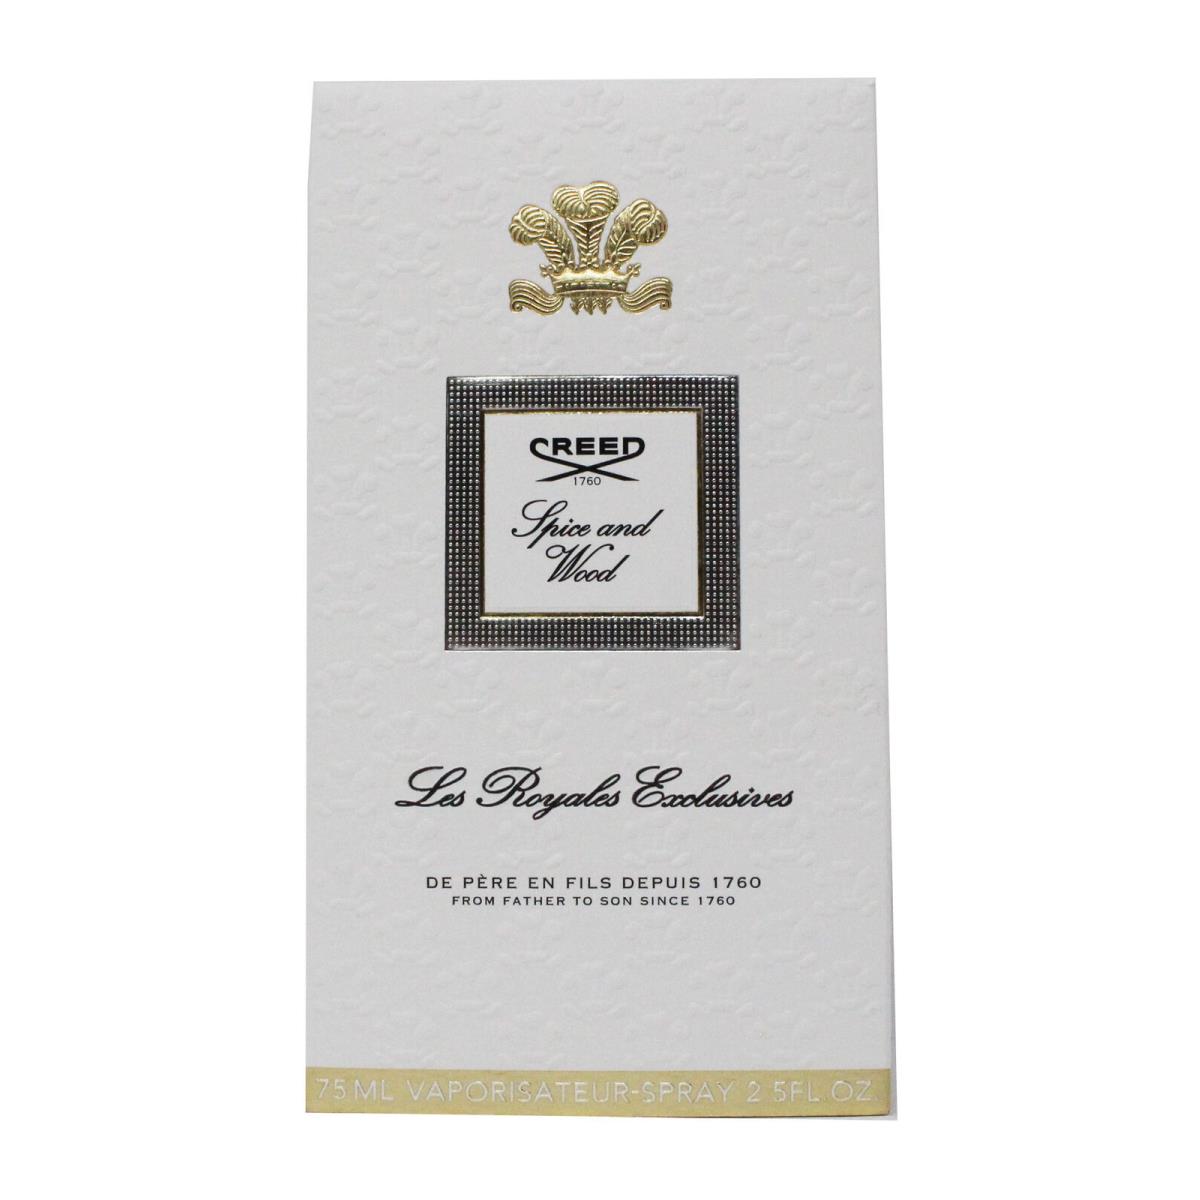 Creed Royal Exclusives Spice and Wood Edp 2.5 Ounce